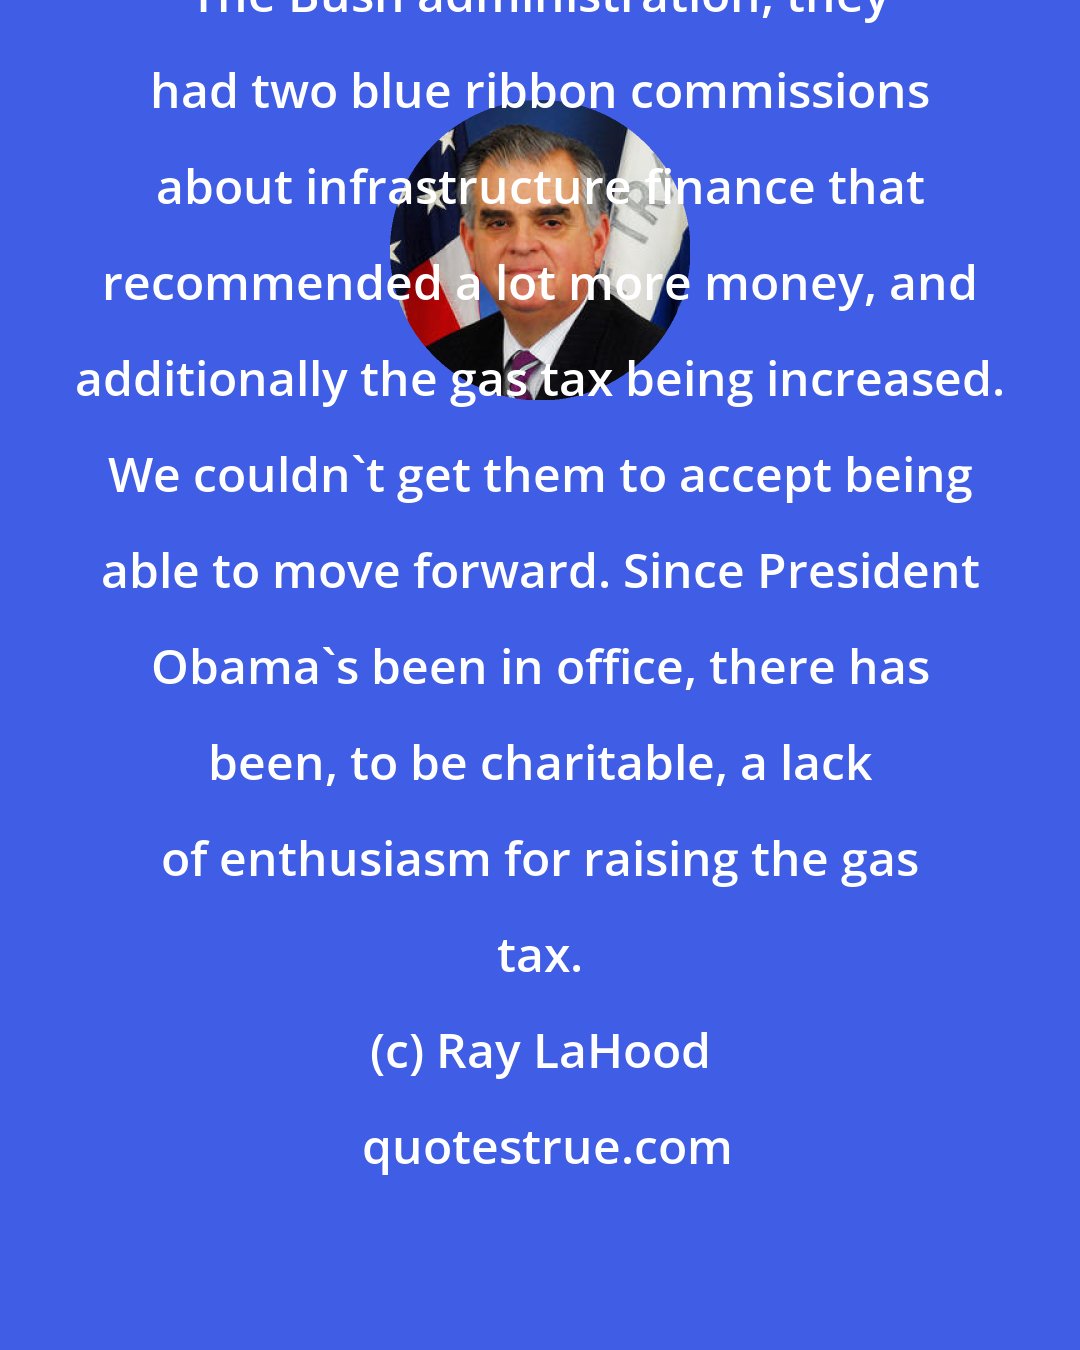 Ray LaHood: The Bush administration, they had two blue ribbon commissions about infrastructure finance that recommended a lot more money, and additionally the gas tax being increased. We couldn't get them to accept being able to move forward. Since President Obama's been in office, there has been, to be charitable, a lack of enthusiasm for raising the gas tax.